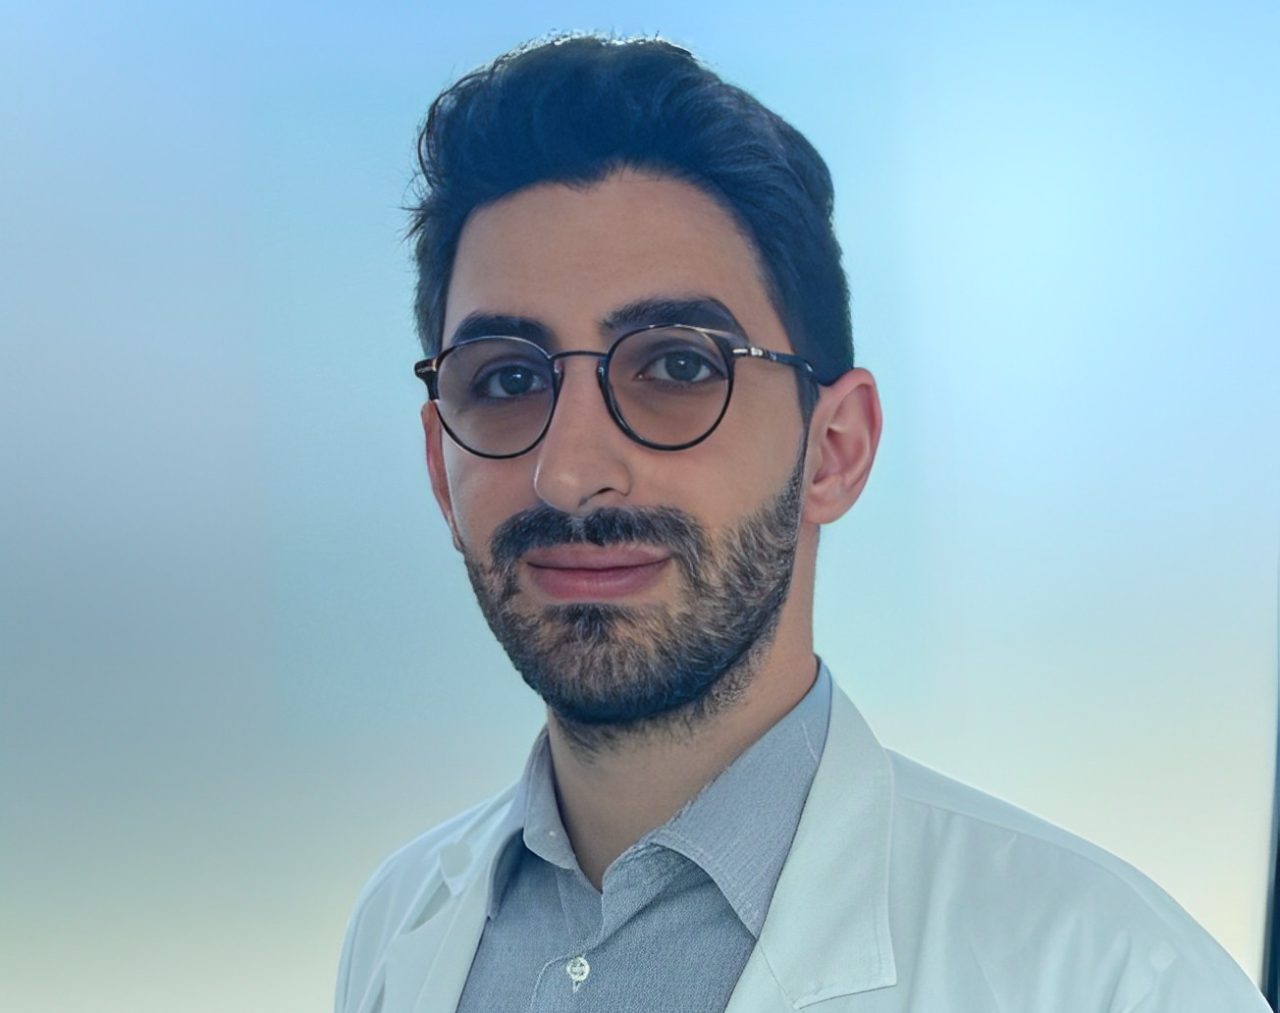 Federico Mastroleo: Excited to share our latest research publication titled “A Bibliometric Analysis of the Oligometastatic State over the Last Two Decades: A Shifting Paradigm for Oncology?” in Cancers MDPI journal